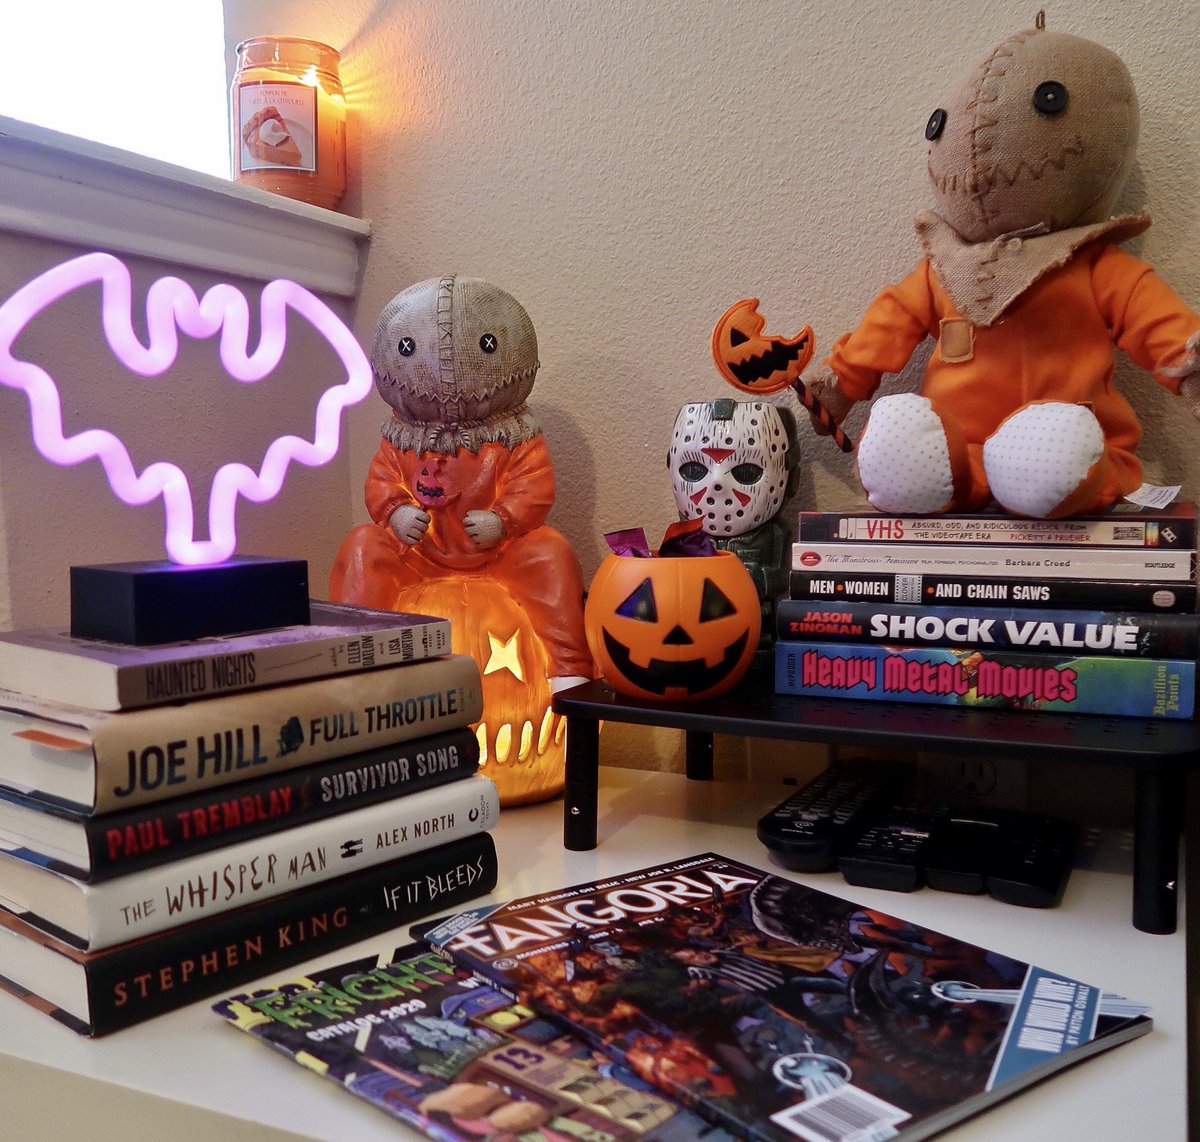 If both areas are occupied, please enjoy the selection of magazines and horror films in our waiting room!